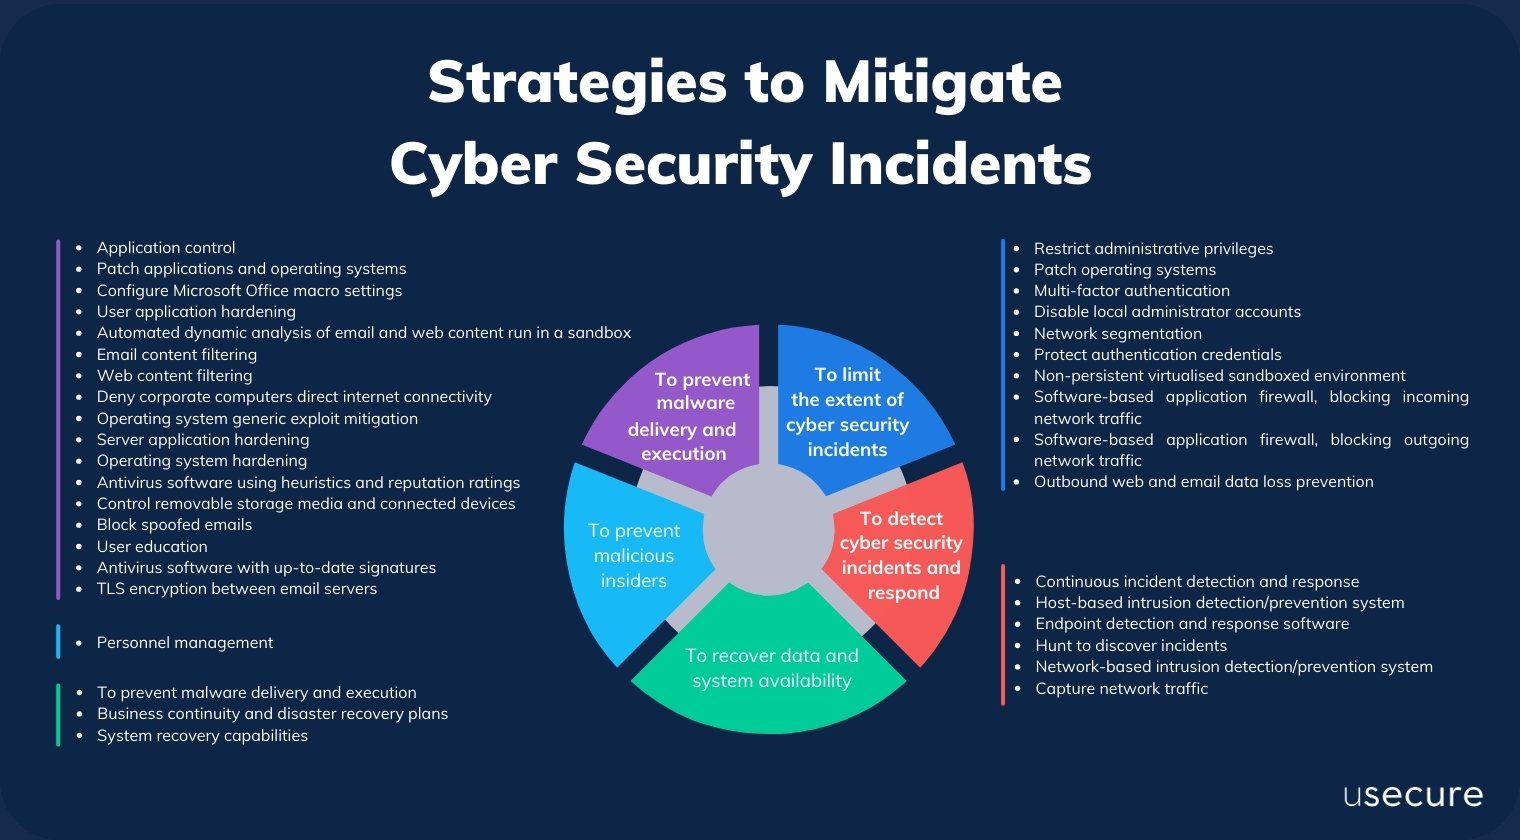 Strategies to Mitigate Cyber Security Incidents